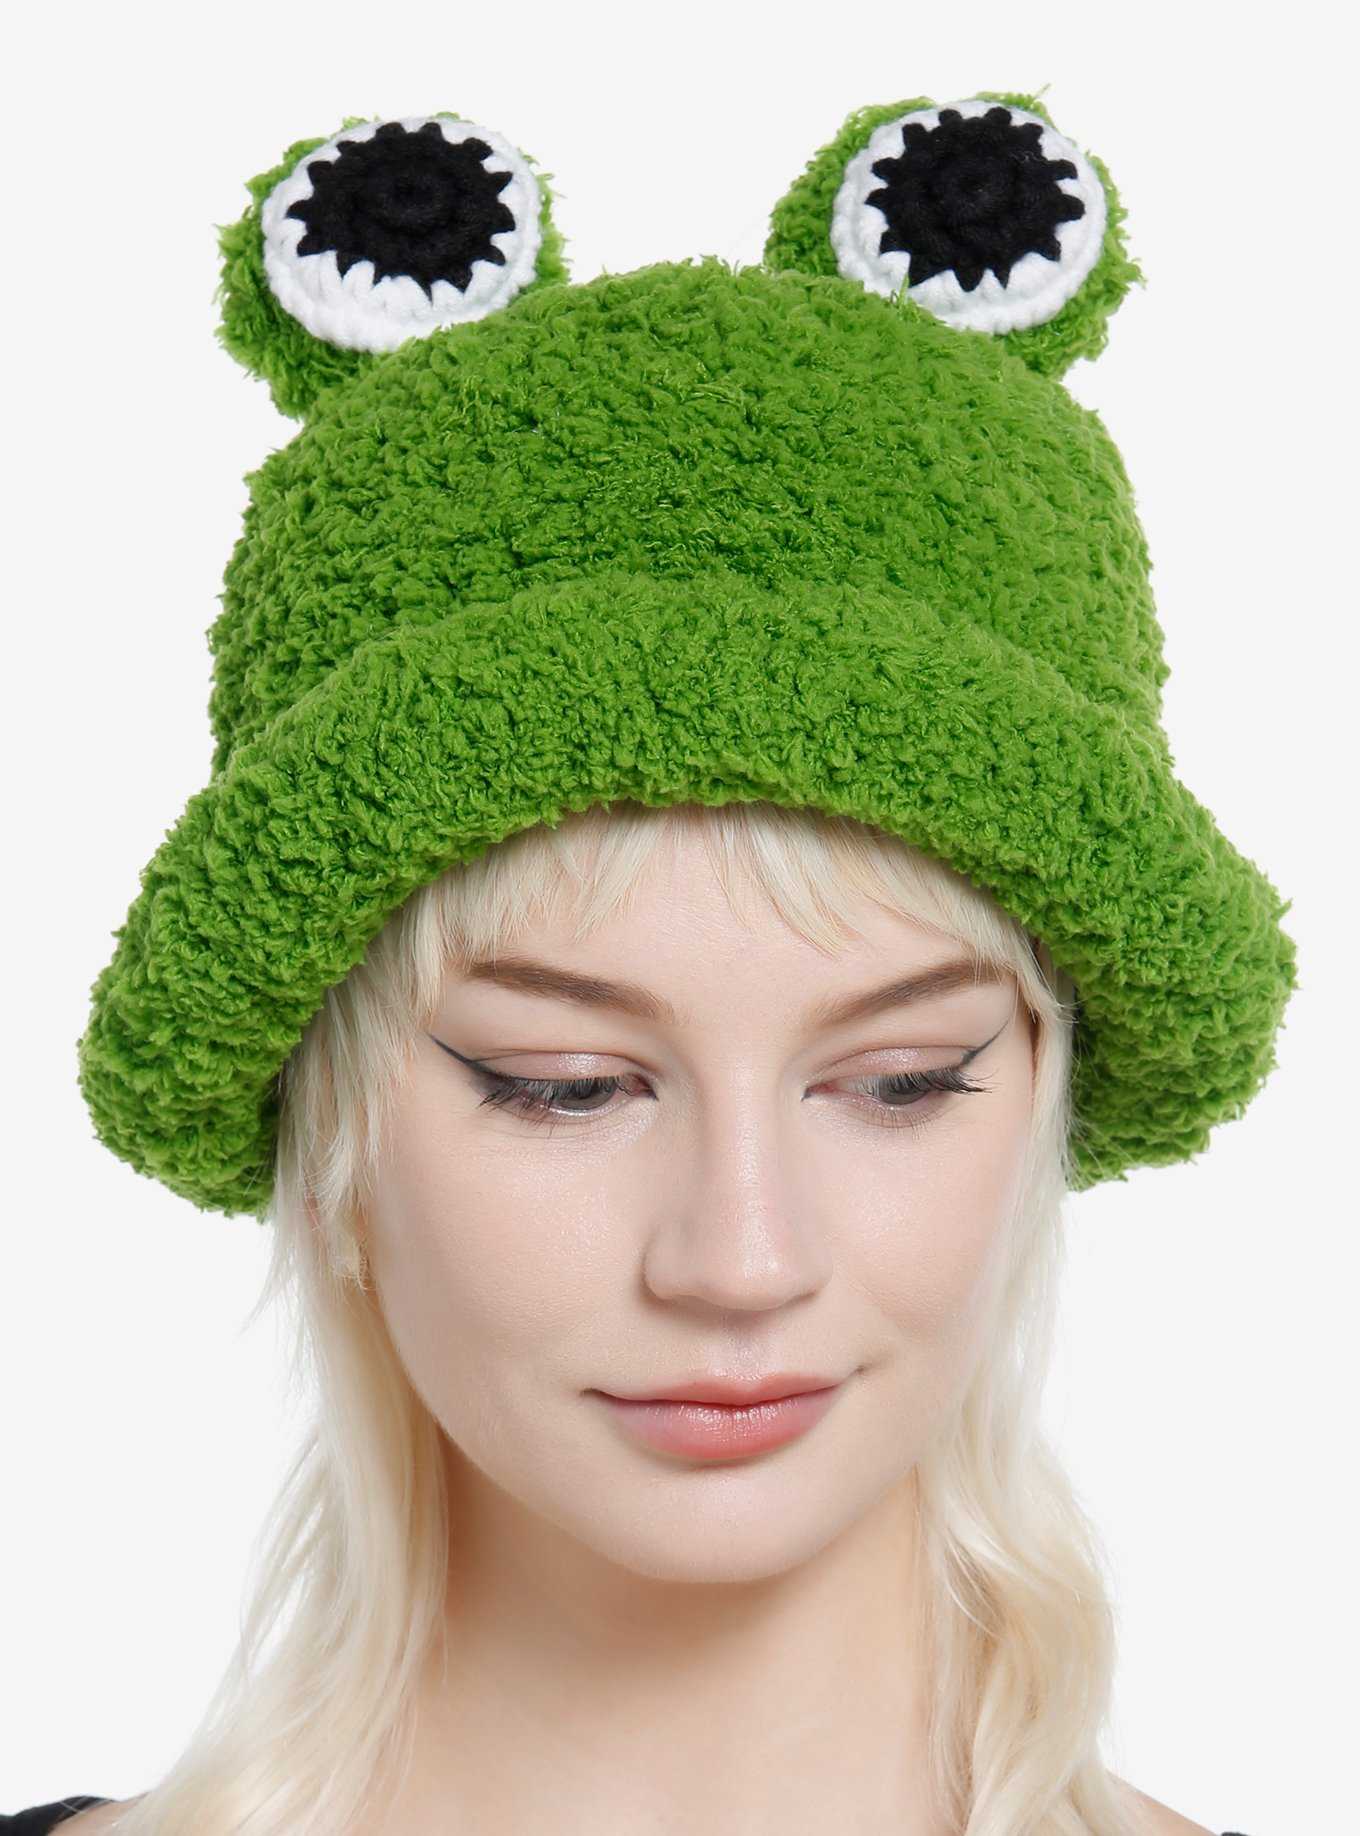 Prince(ss) & The Frog Hat & Crown Crochet Kit | One Big Happy Yarn Co.